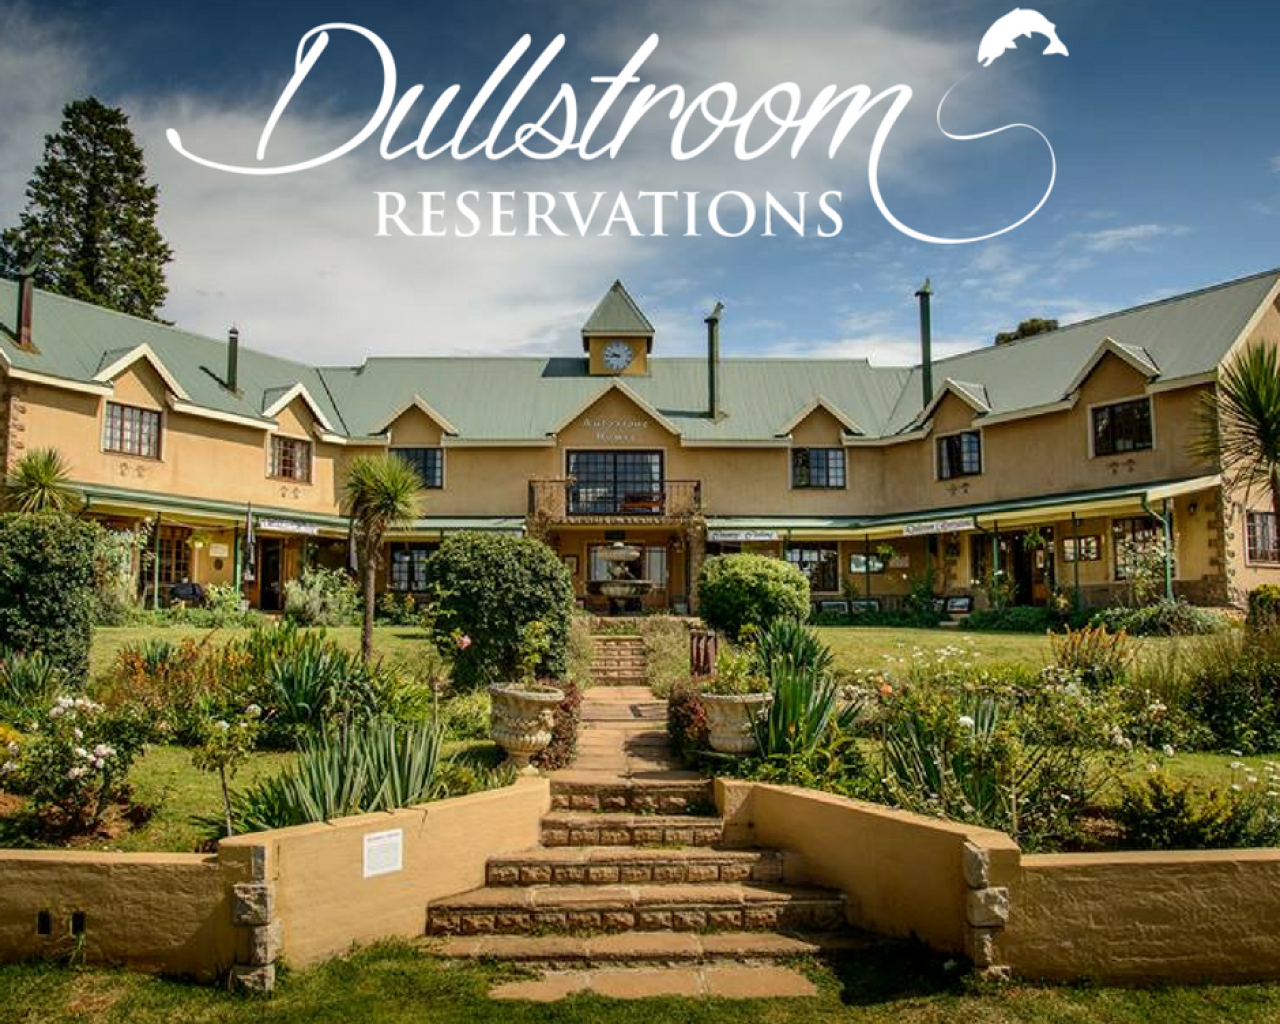 Dullstroom Reservations' offices in Main Street